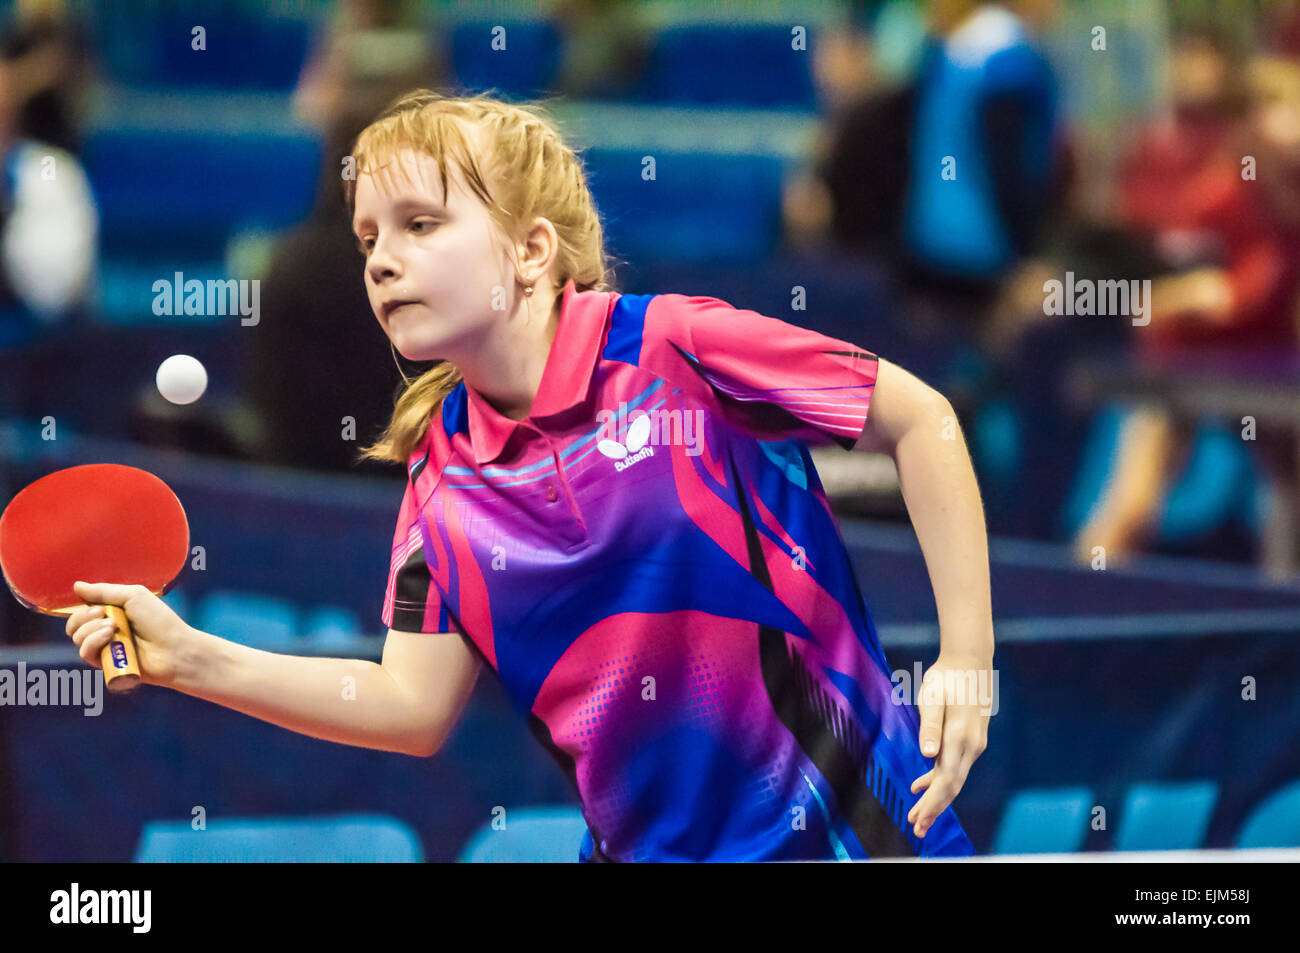 ORENBURG, ORENBURG region, RUSSIA - 5 February 2015: Girl playing table tennis at the tournament strongest sportsmen of Russia 'TOP – 12' in table tennis. Stock Photo